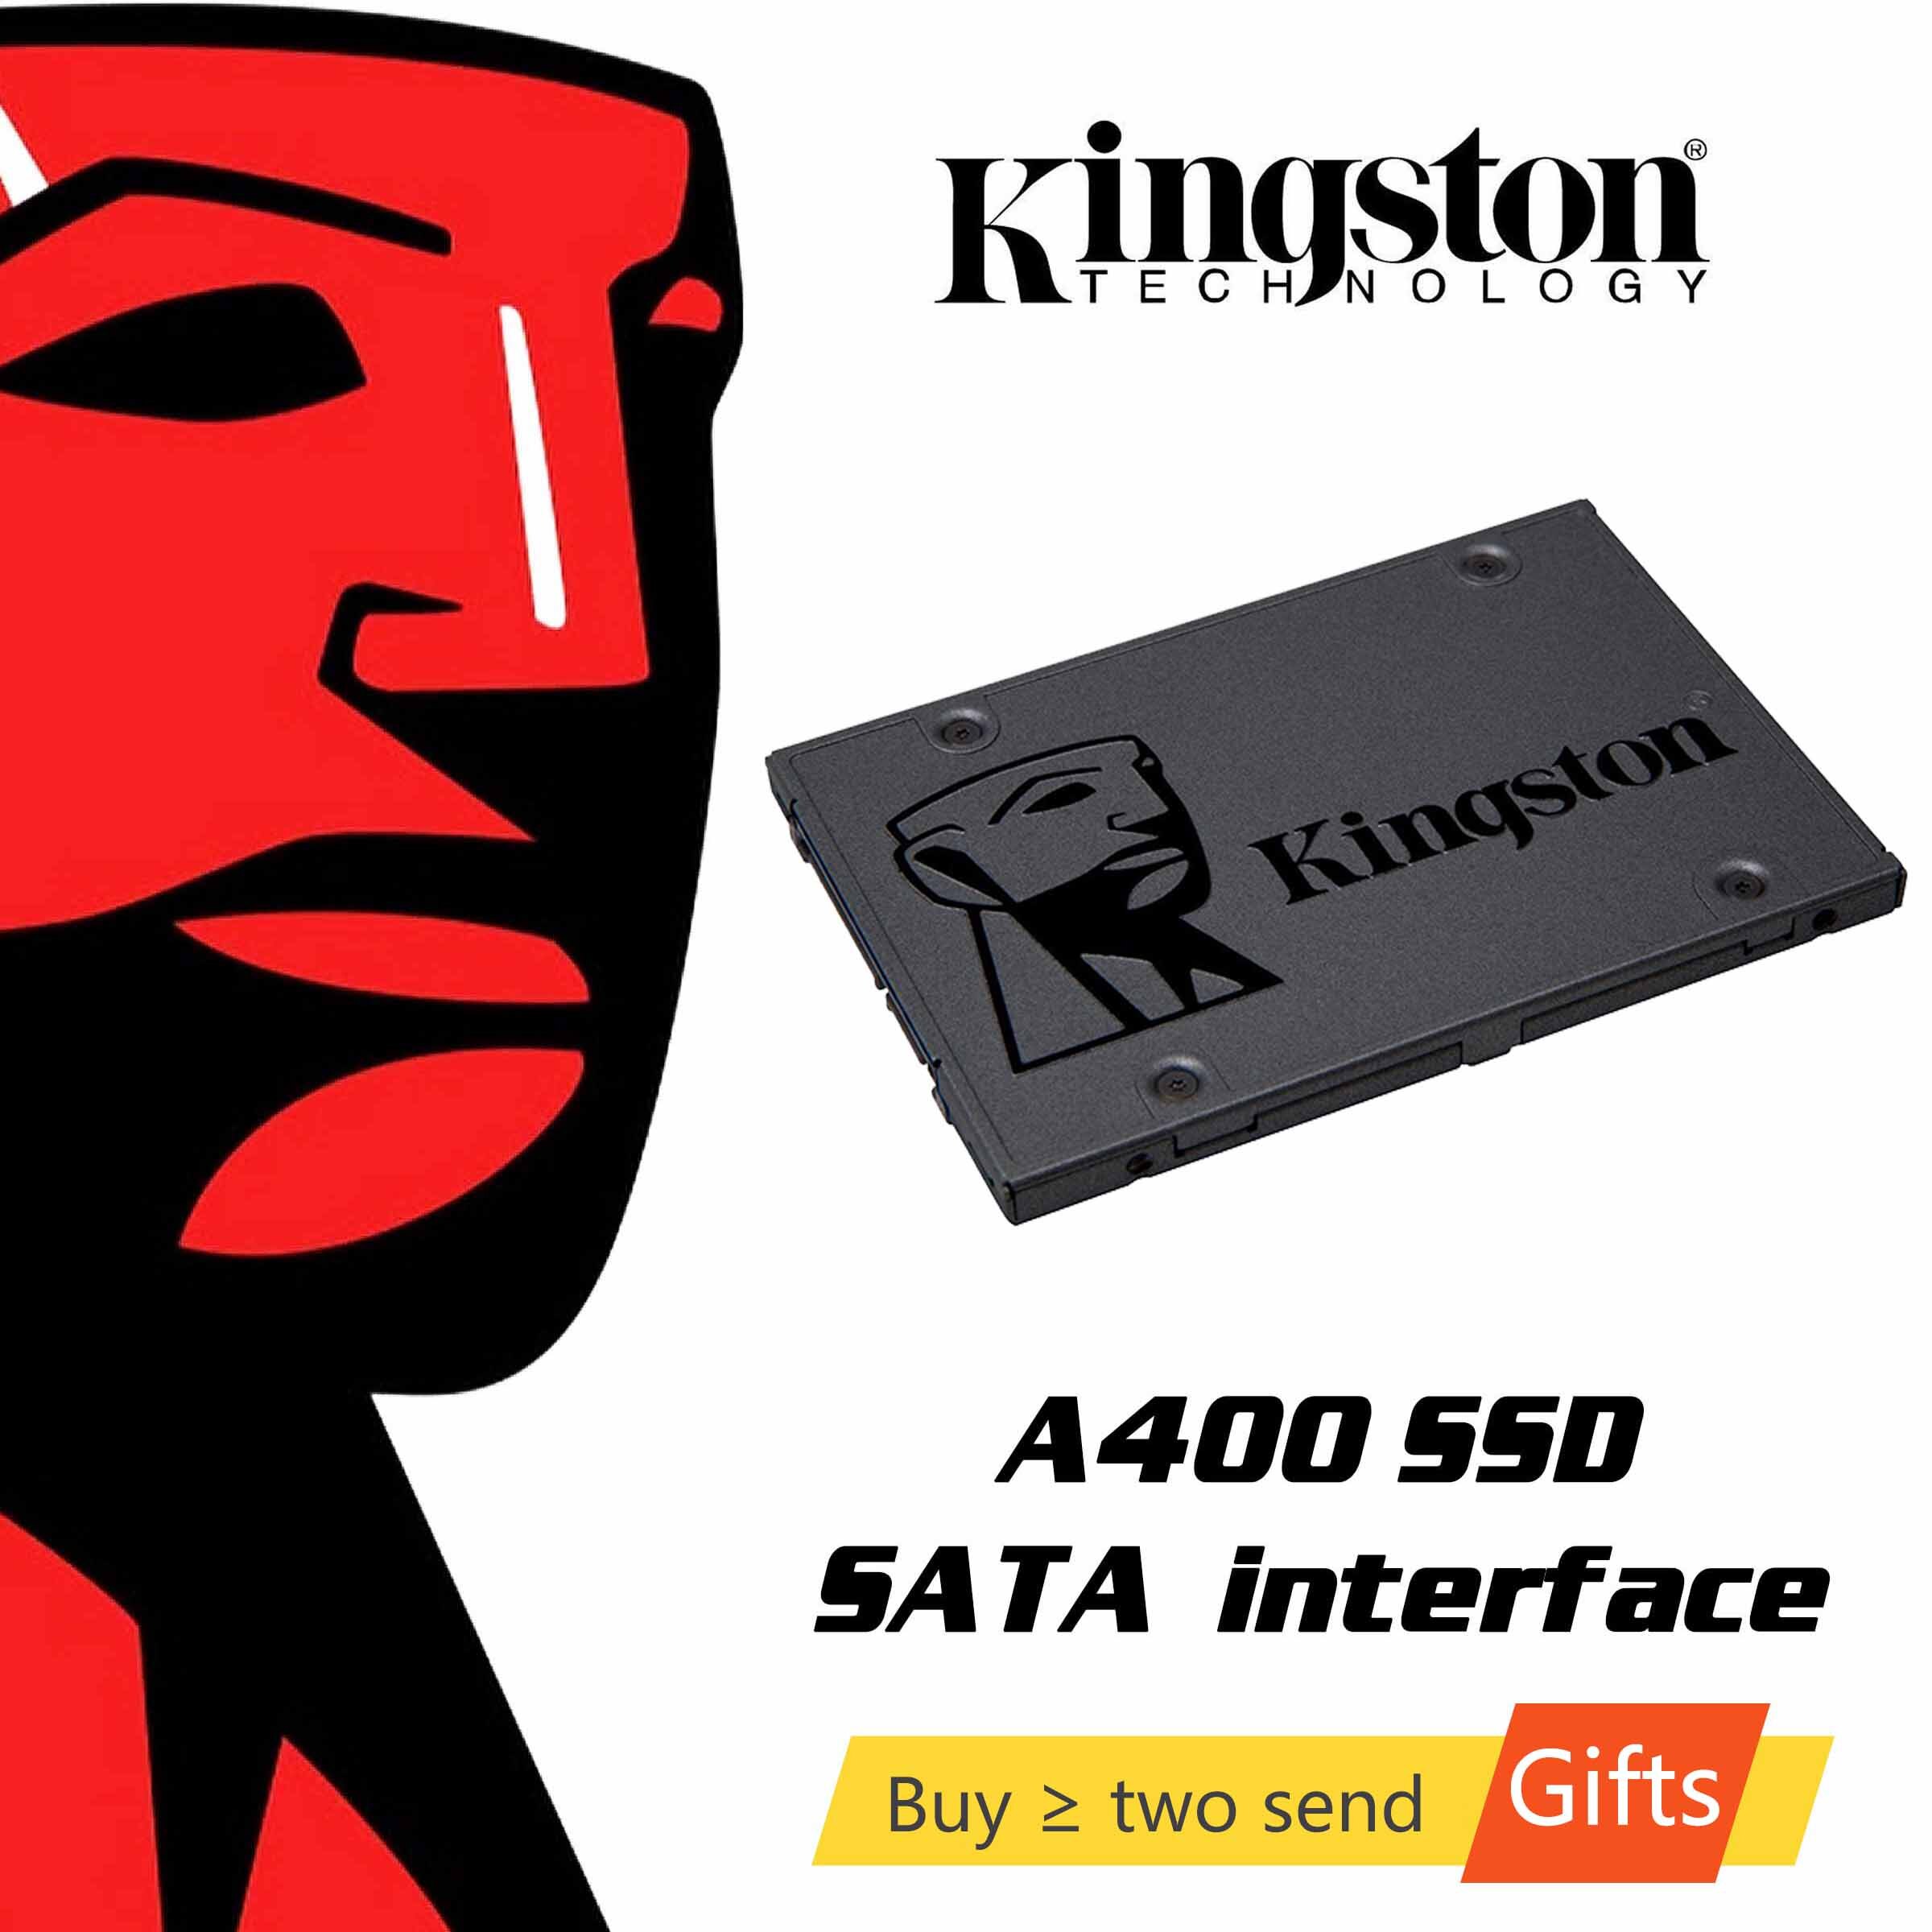 shop with crypto buy Kingston SSDNow A400 120gb 240gb 480GB SSD Solid State Drive 2.5 inch SATA III 120 240 g Notebook PC Internal HDD Hard Disk pay with bitcoin